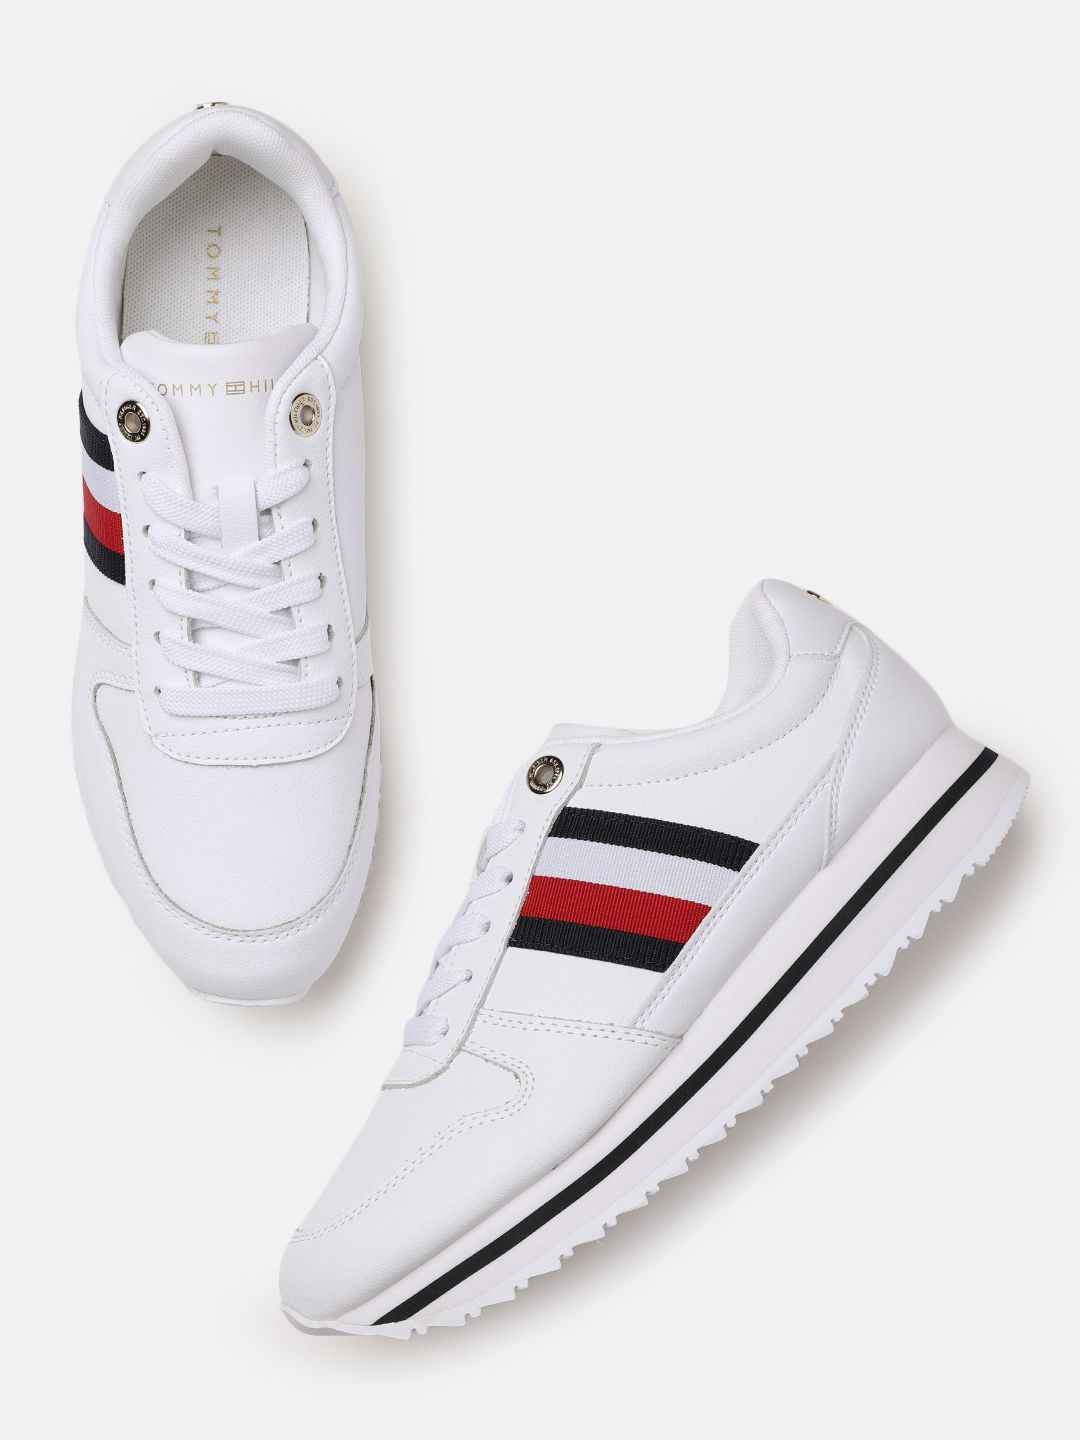 Tommy Hilfiger Women White Striped Leather Sneakers Price in India